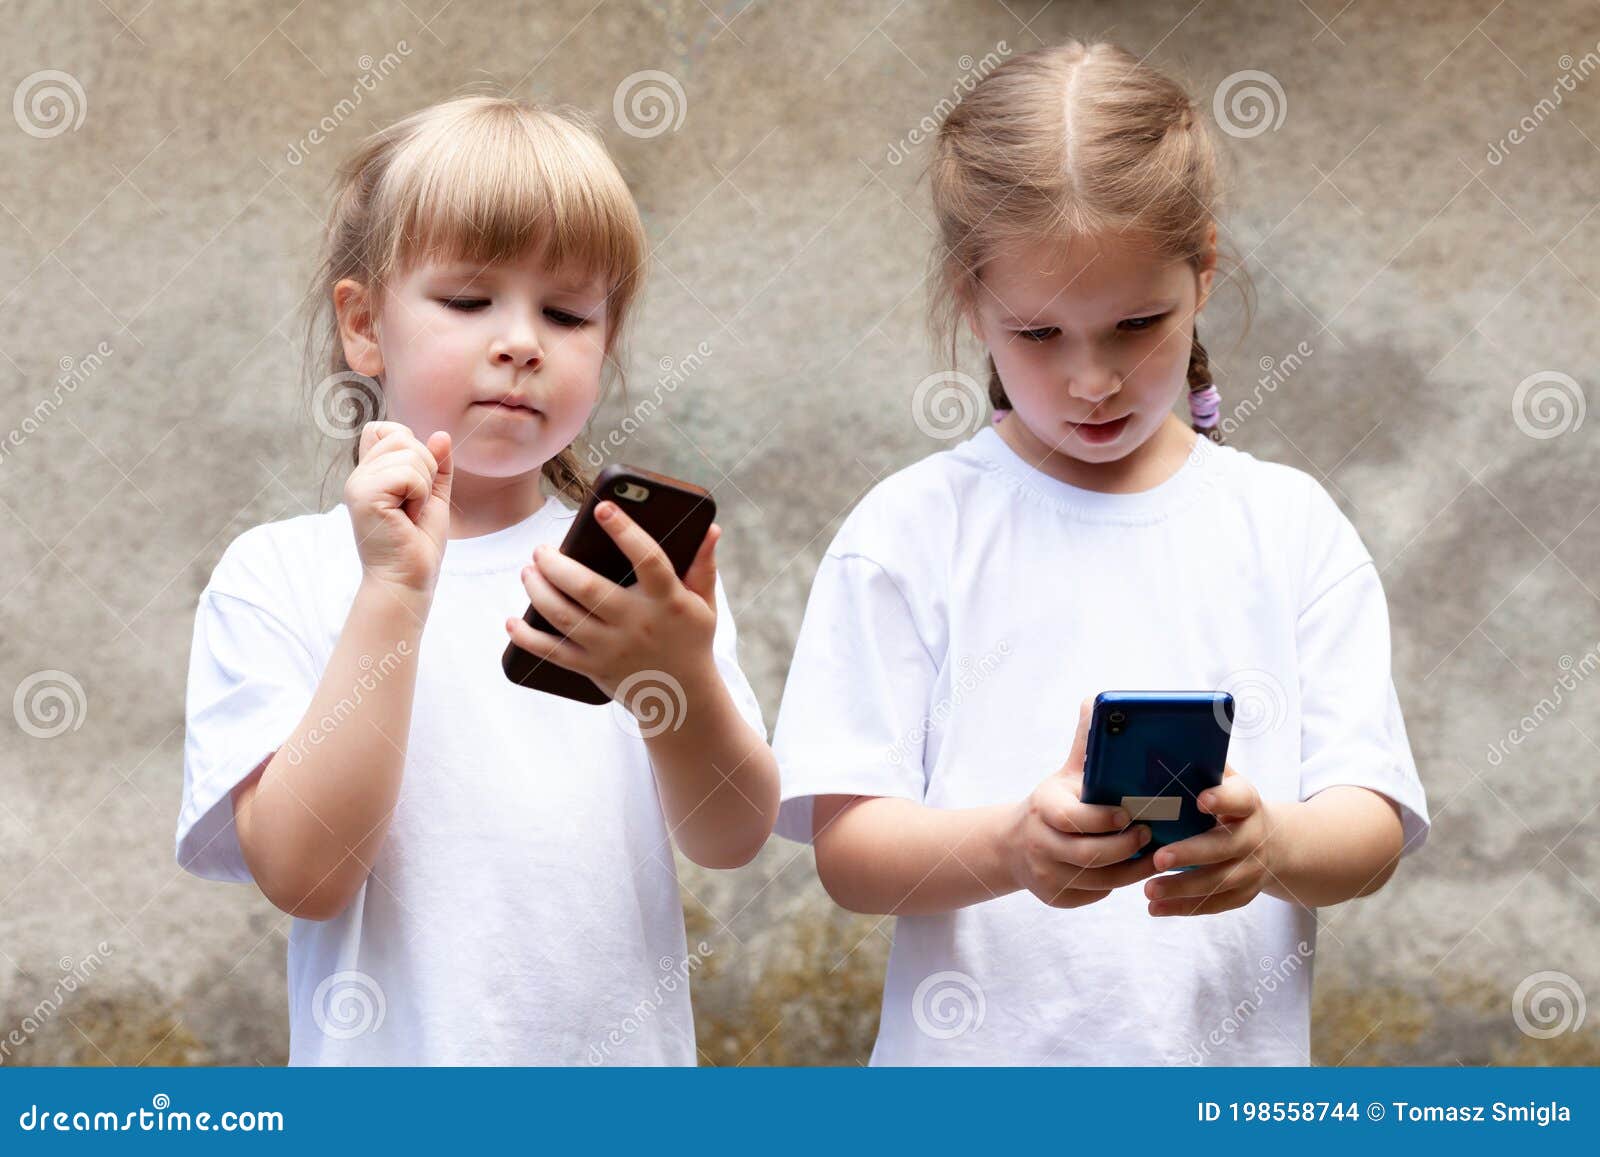 two little girls, sisters using modern smartphones, young children holding their mobile phones, playing around. new generation